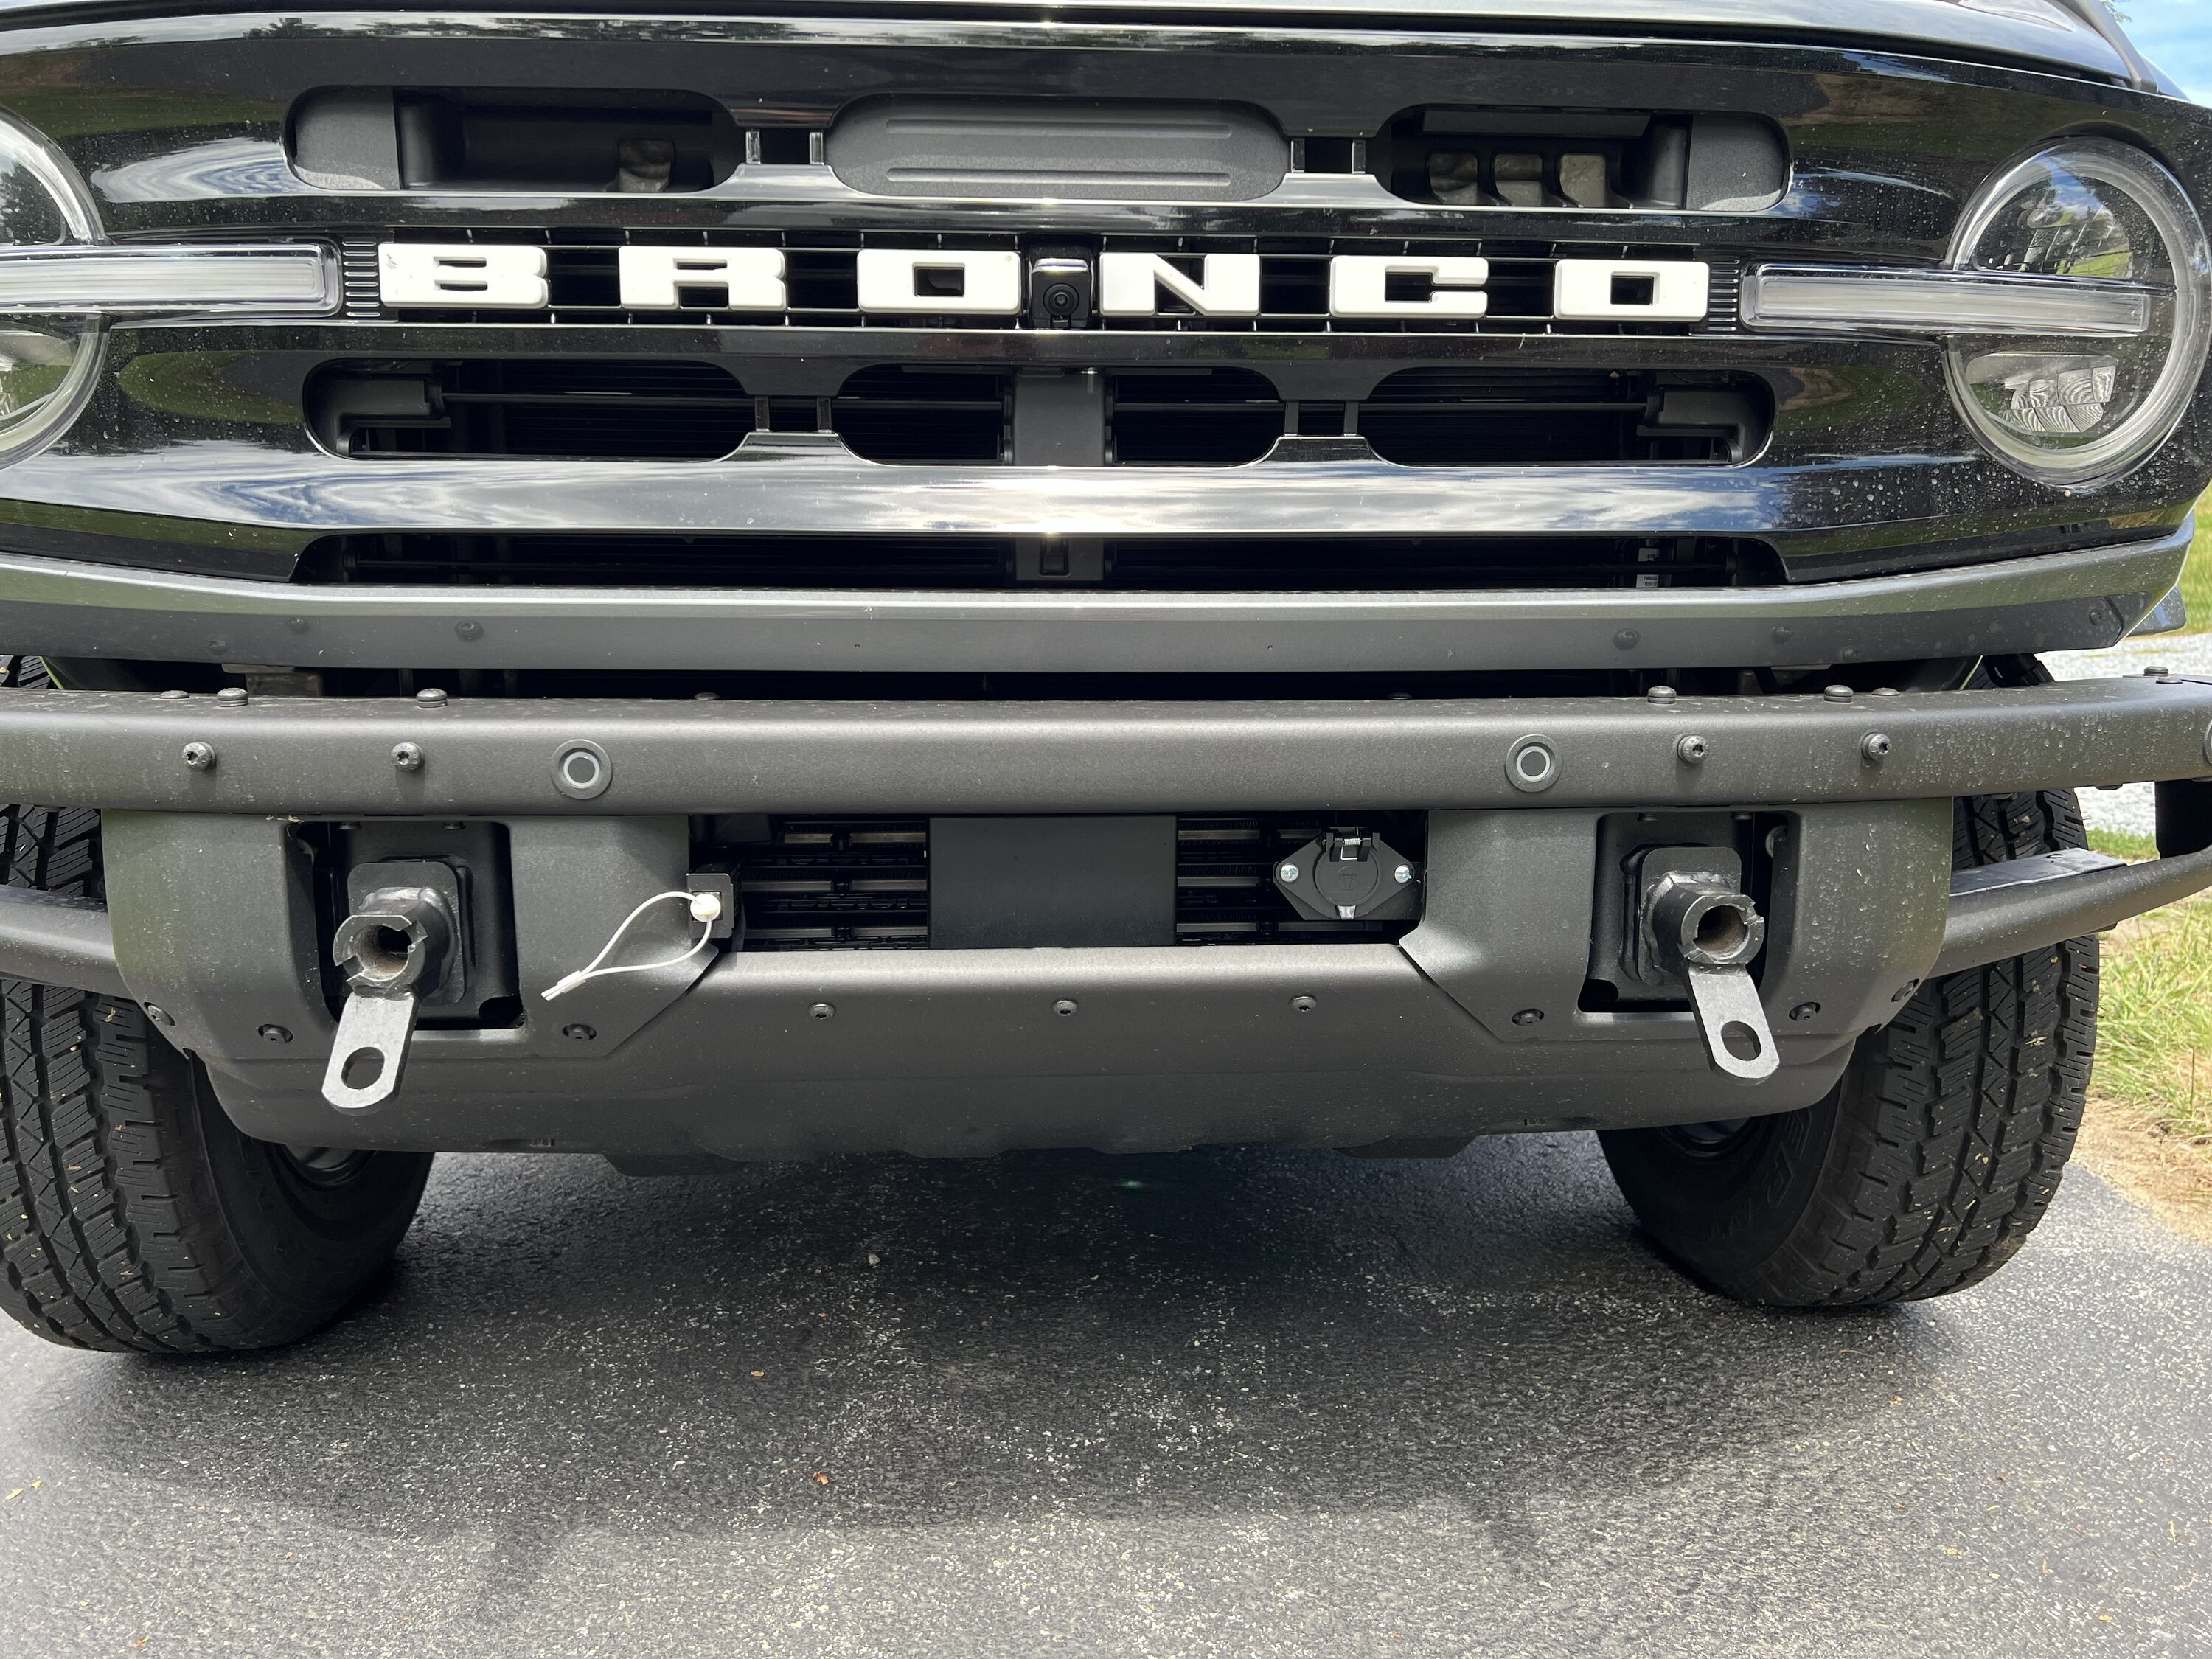 Ford Bronco Flat tow equipment needed to flat tow the 2021 Bronco? 1677168183316